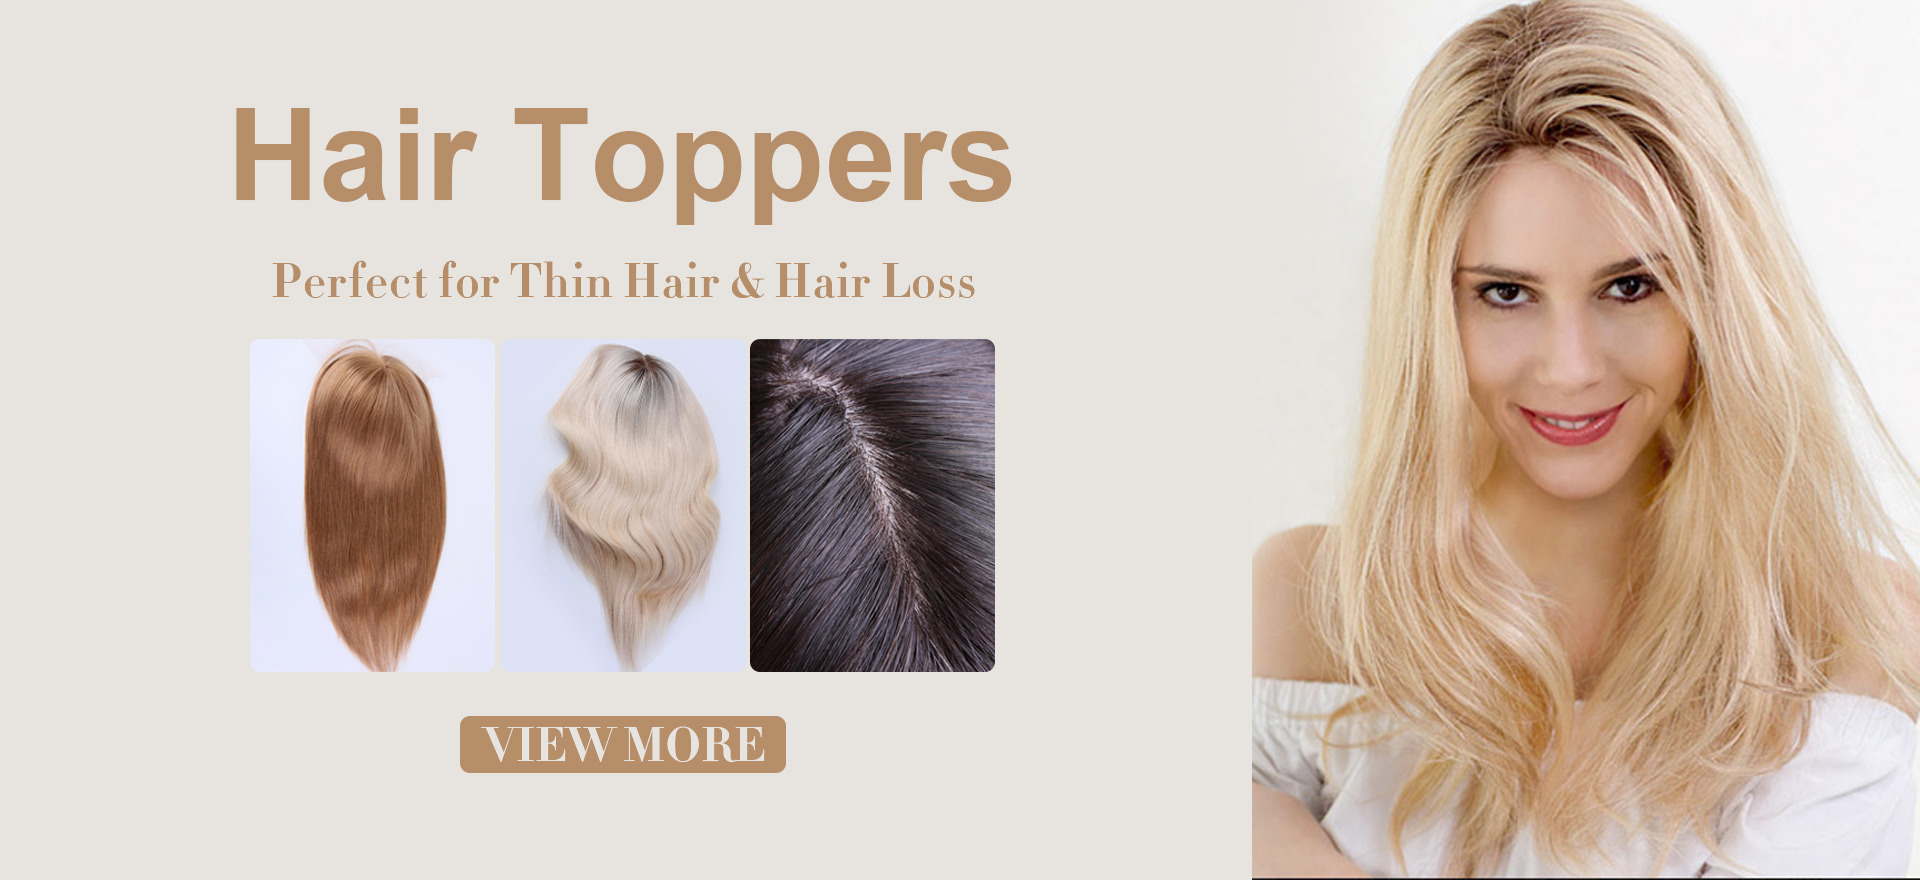 HAIR TOPPERS